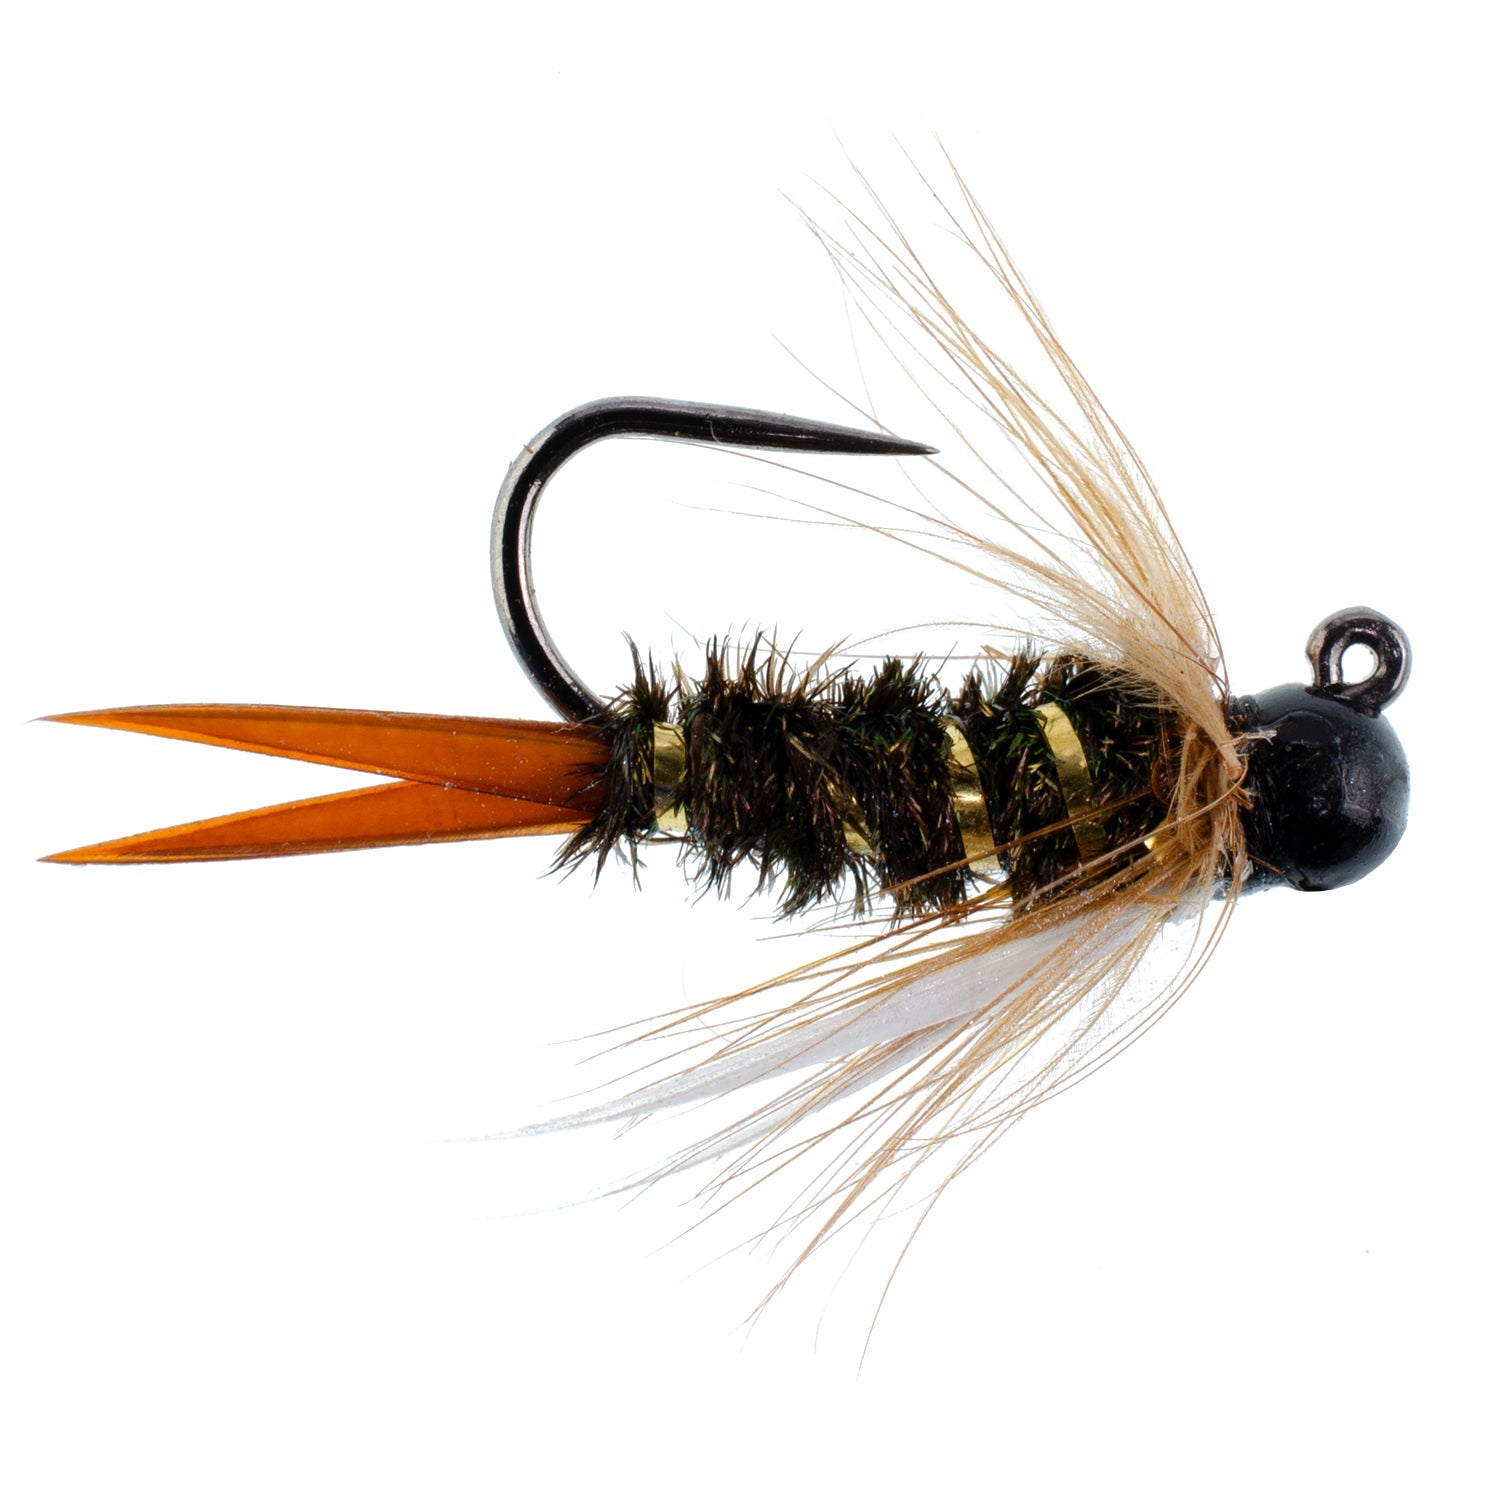 Black Tungsten Bead Prince Jig Tactical Czech Nymph Euro Nymphing Fly - 6 Flies Size 12